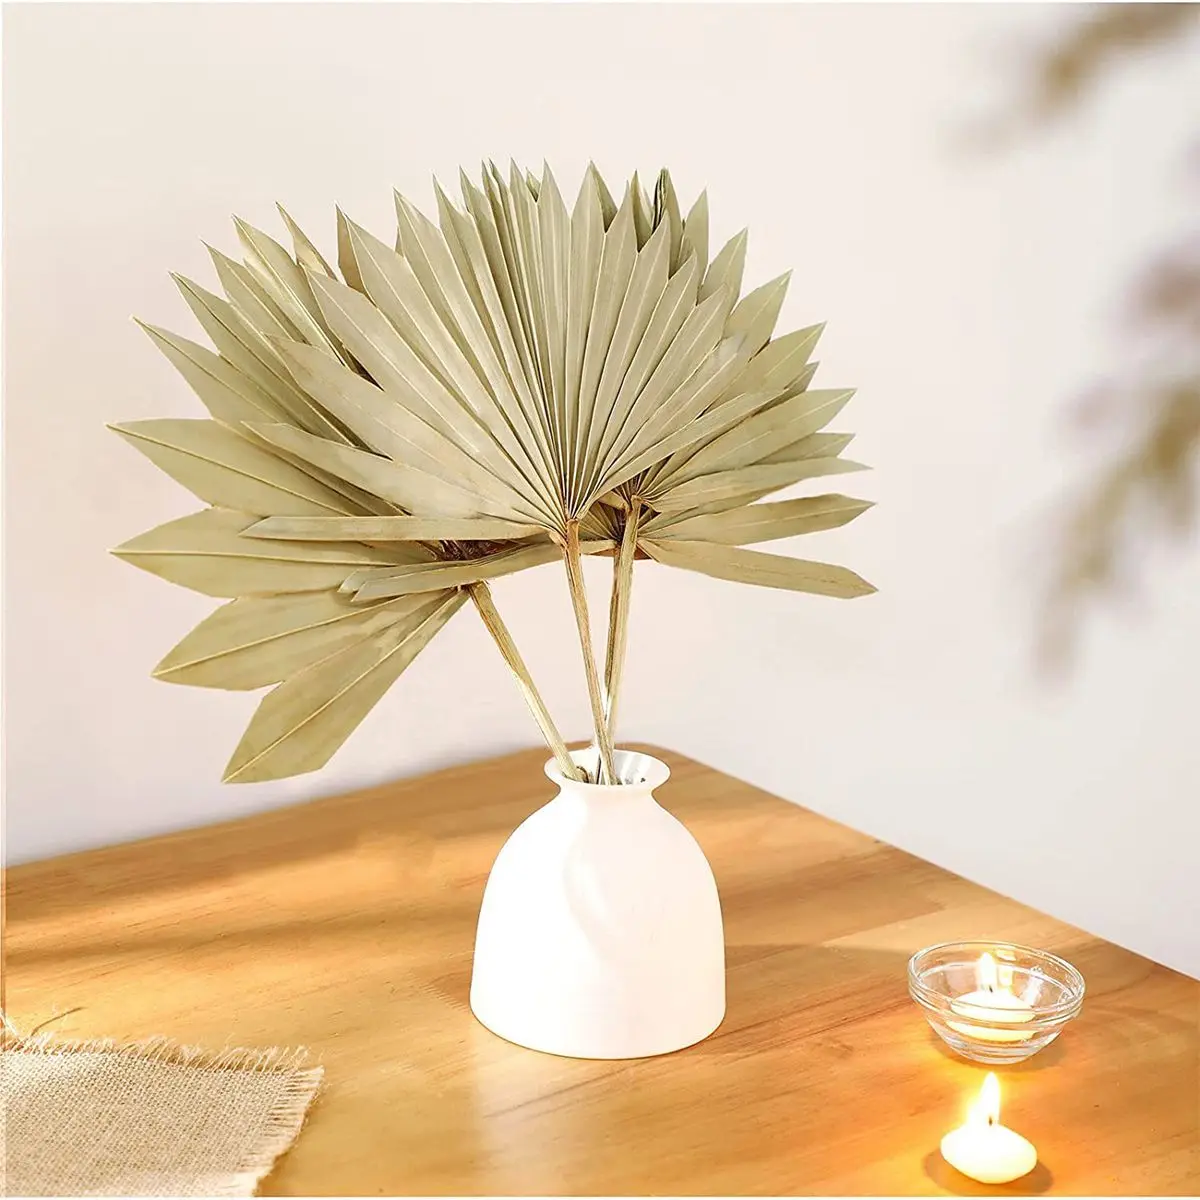 

DIY Home Natural Bohemian Party Decoration Dried Plant Fan Leaf Leaves Palm Spears